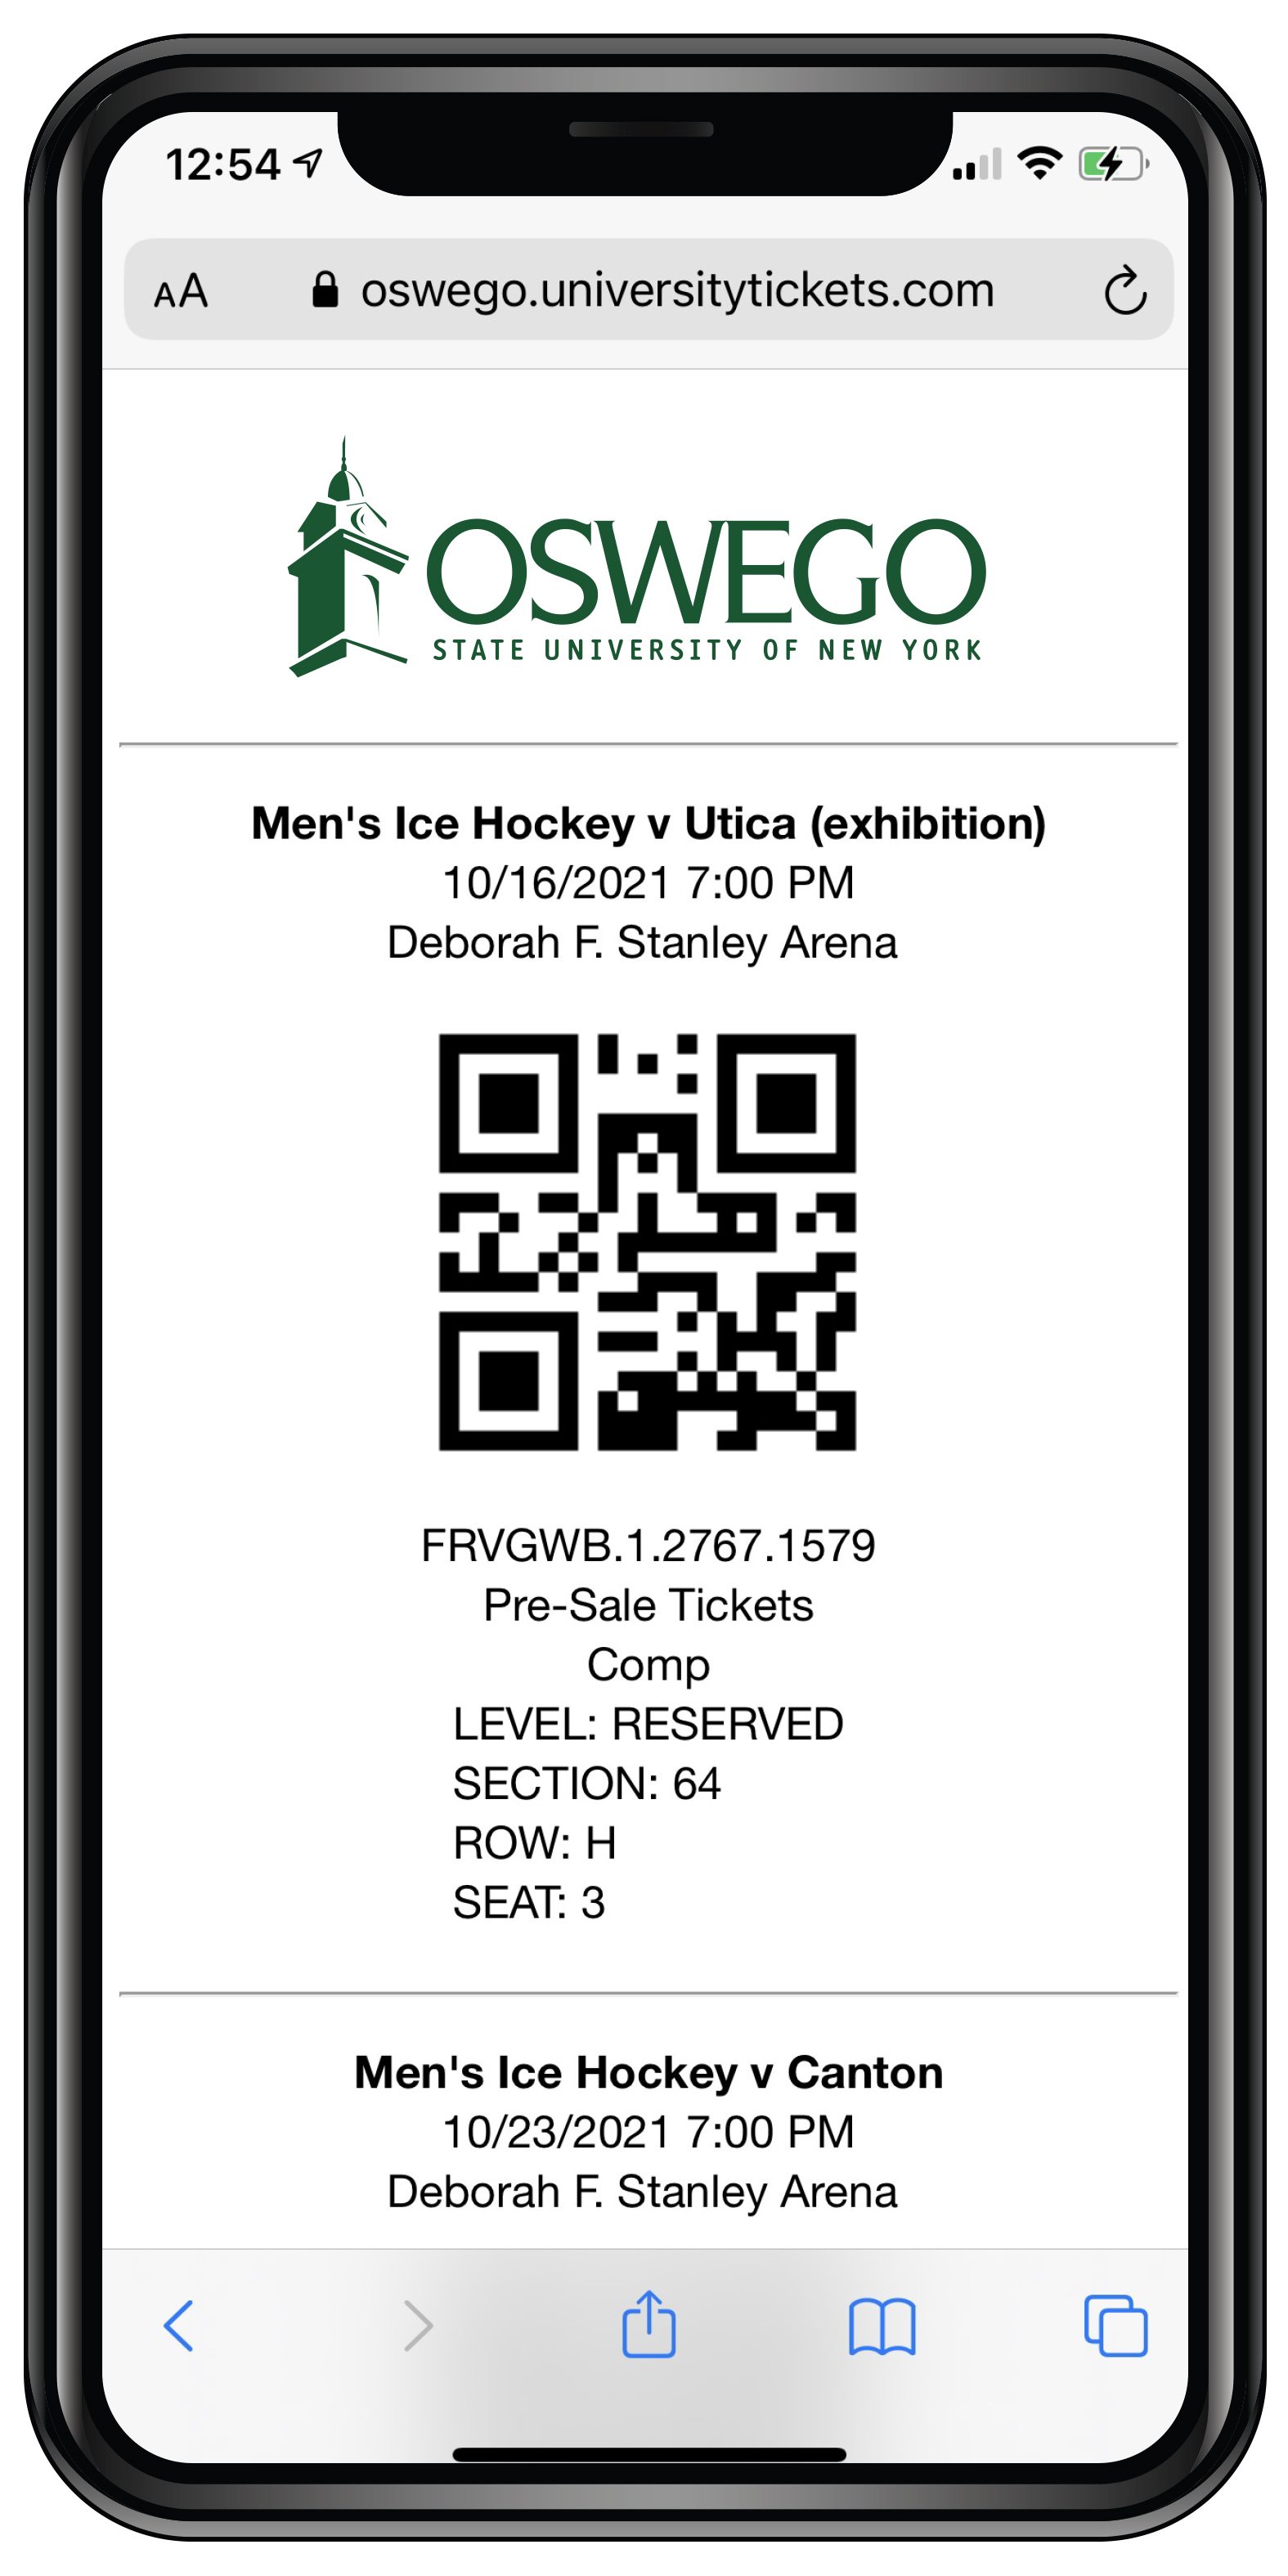 The e-ticket and QR code for paperless entry